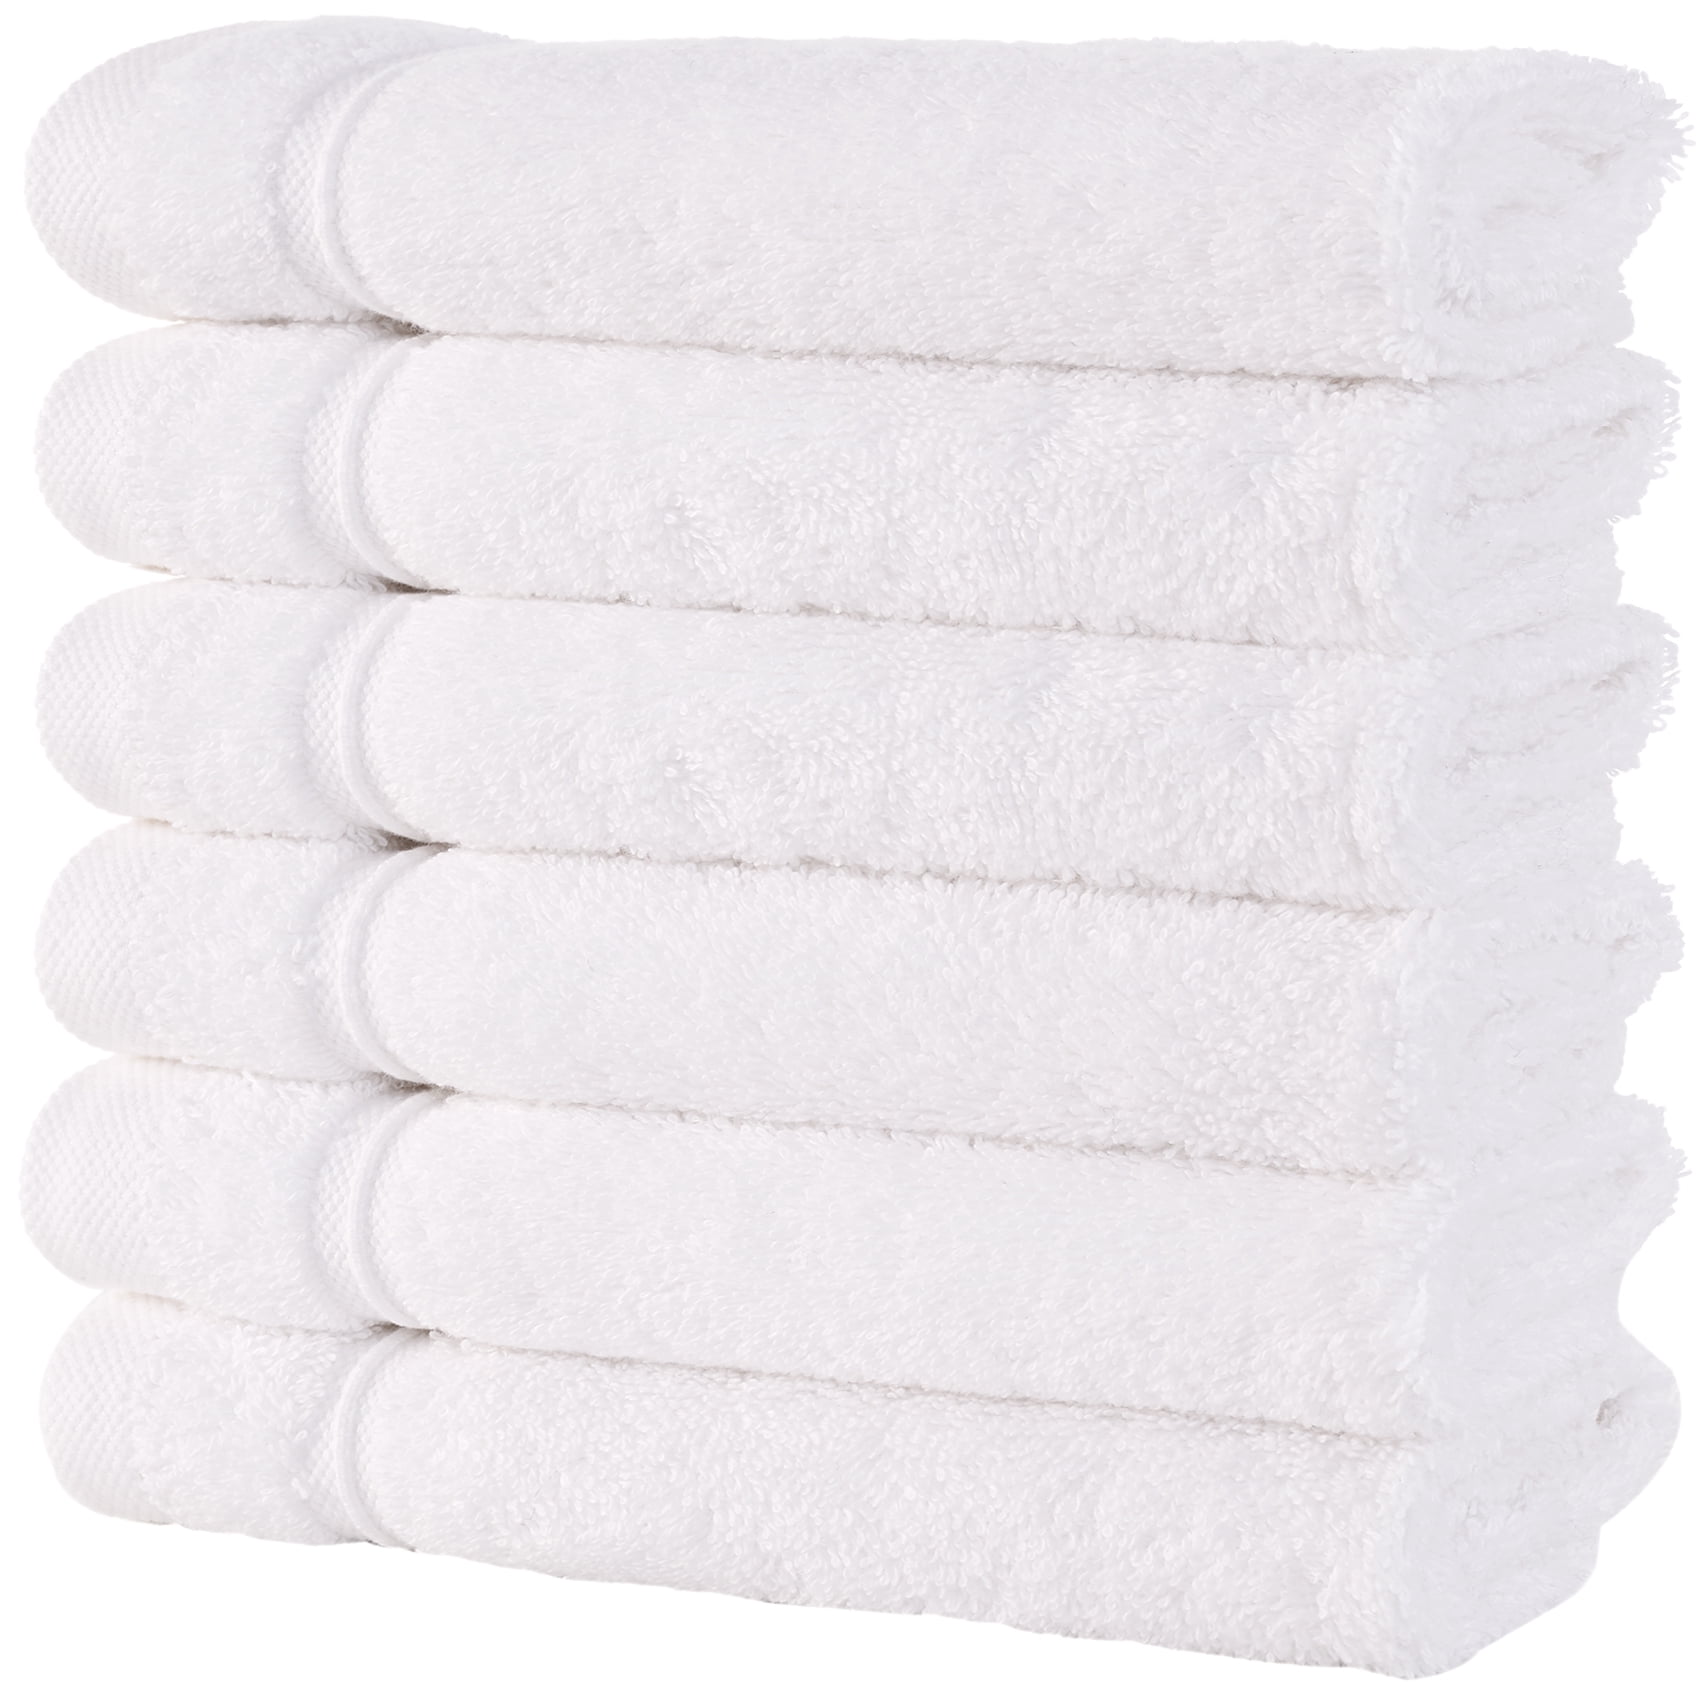 Hasen Hotel Luxury Bath Towel 6-Pack Set  100% Pure Cotton, Spa Quality  Absorbent, 1 - Fred Meyer